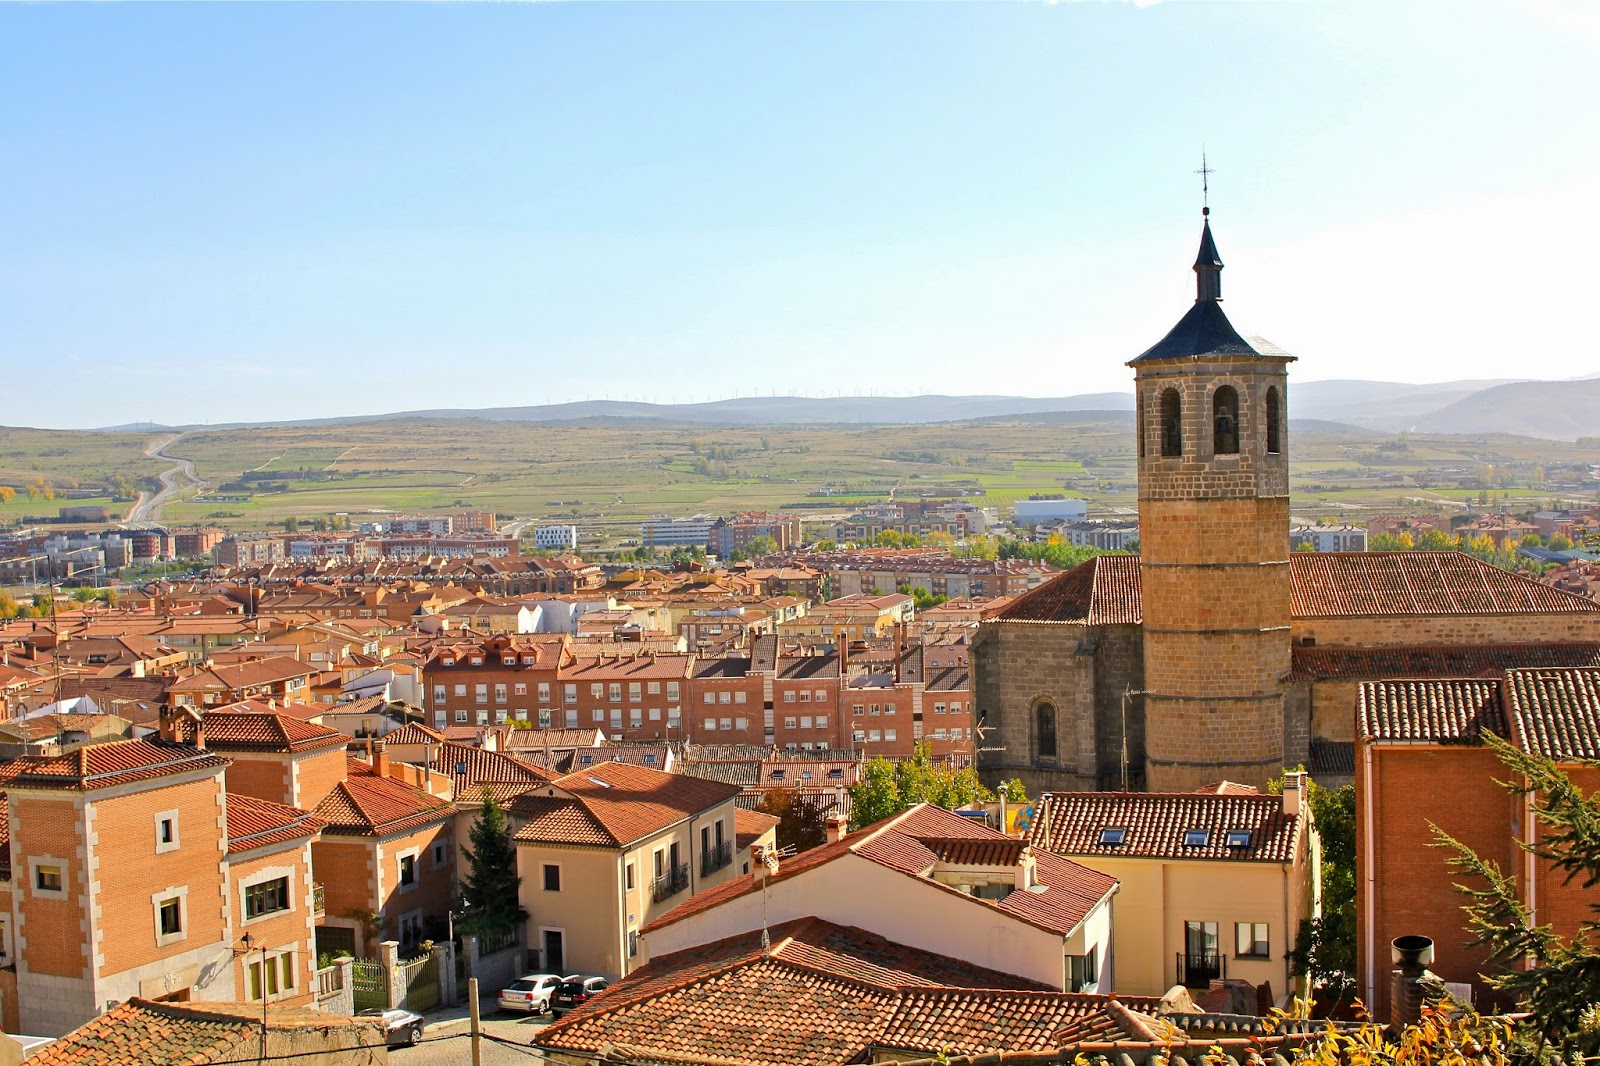 Ávila: 5 best day trips from Madrid - all less than 2 hours away from the city center! | adelanteblog.com